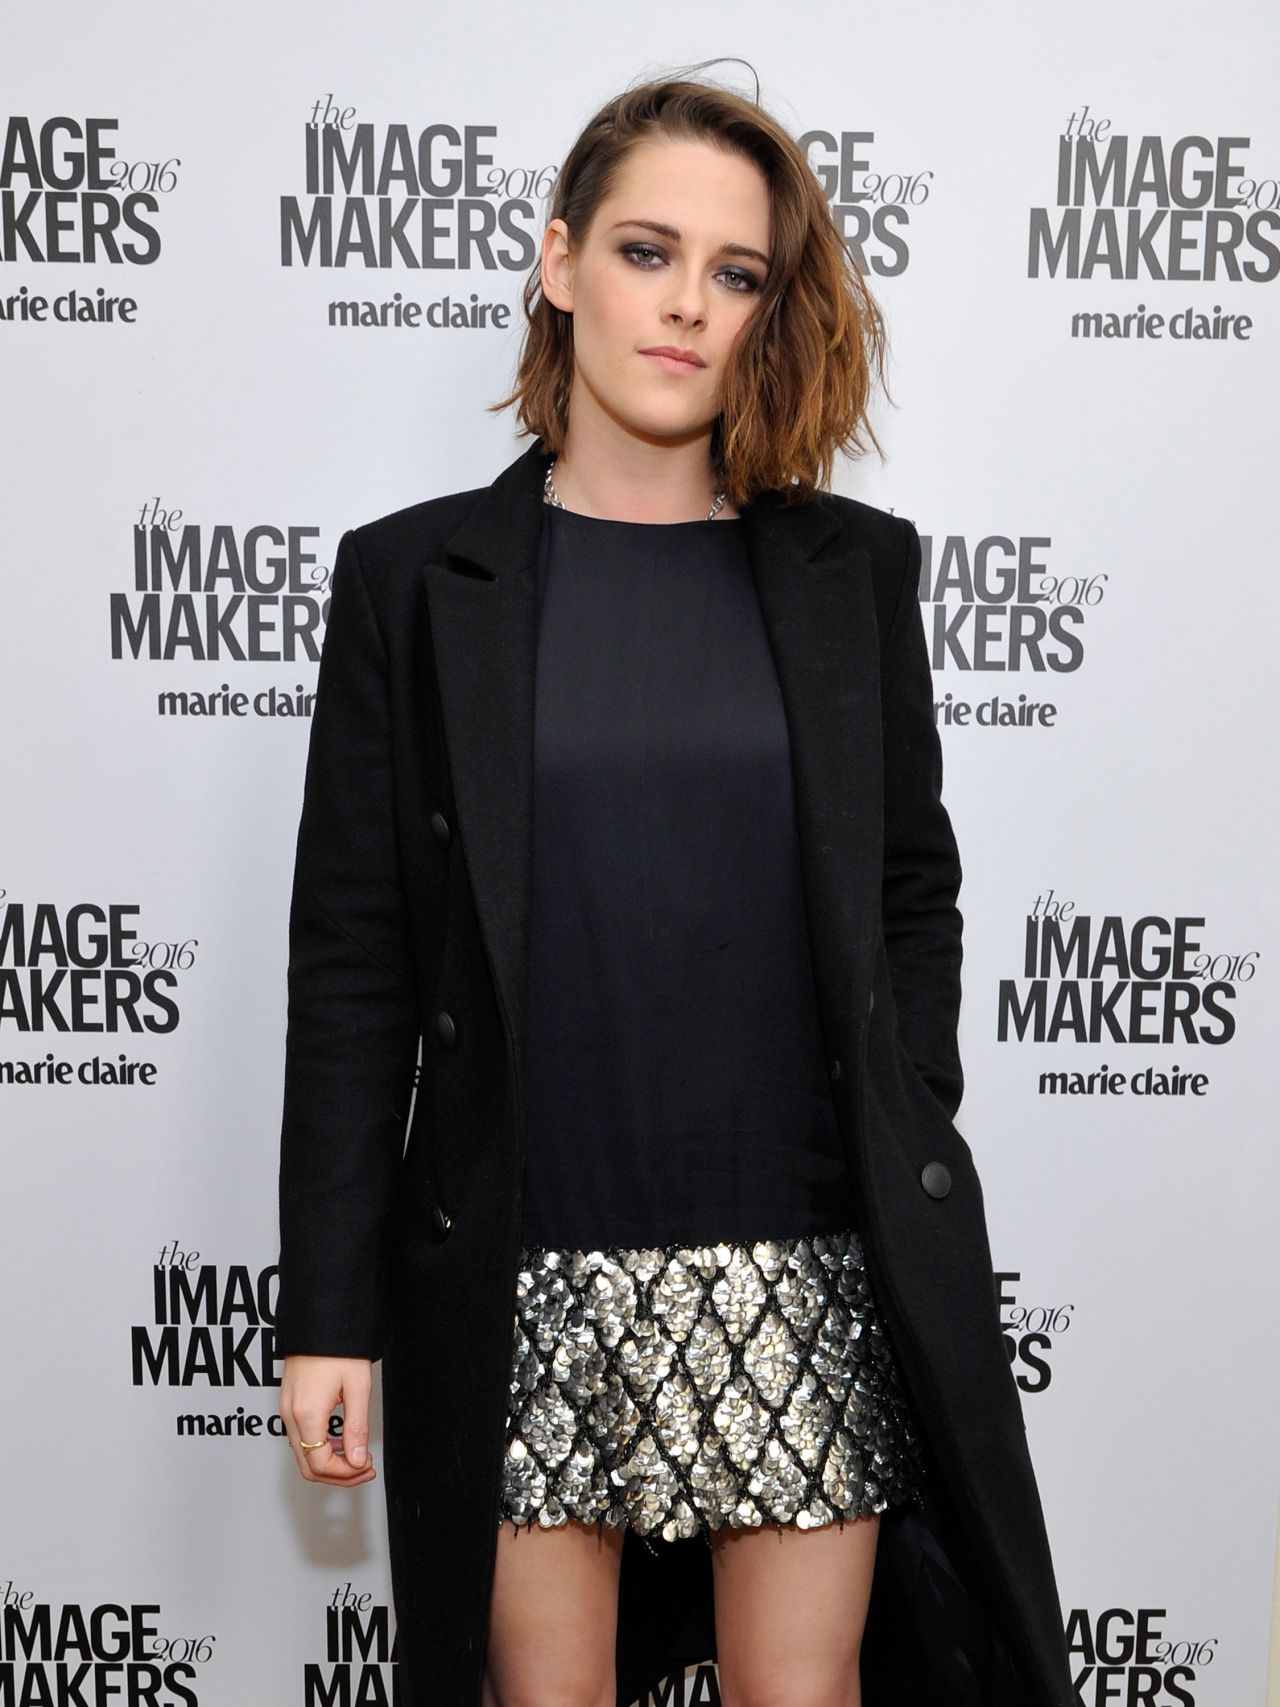 kristen-stewart-inaugural-image-maker-awards-hosted-by-marie-claire-in-los-angeles-1-12-2016-14